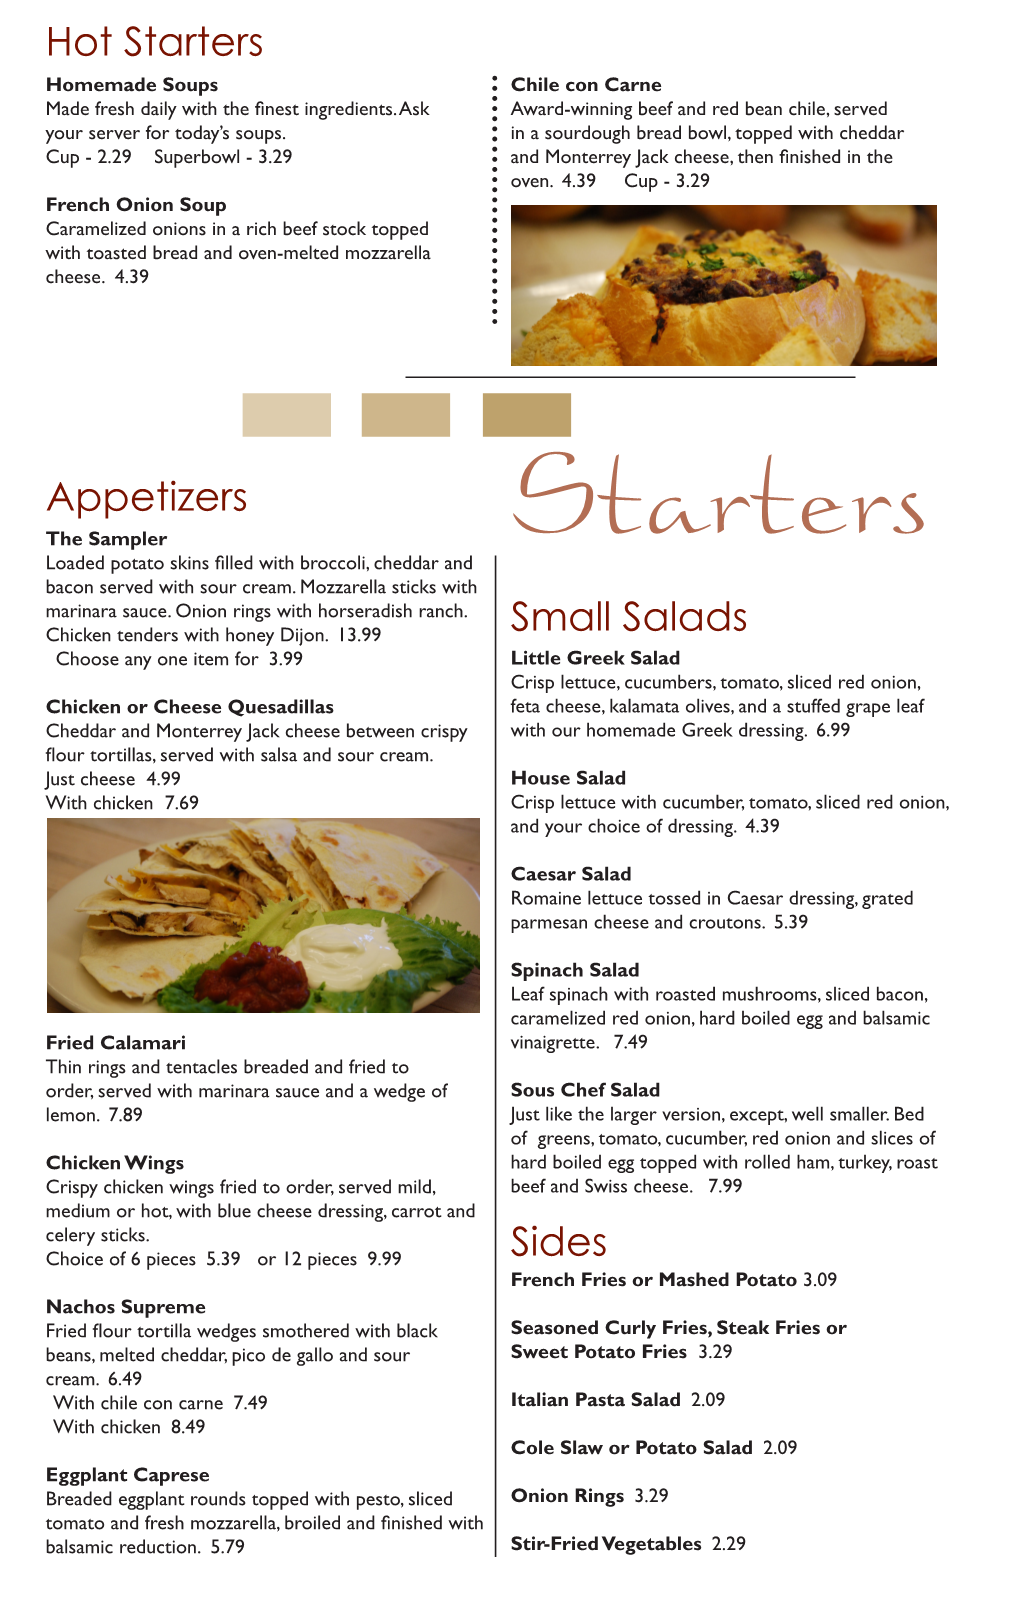 Appetizers Small Salads Hot Starters Sides